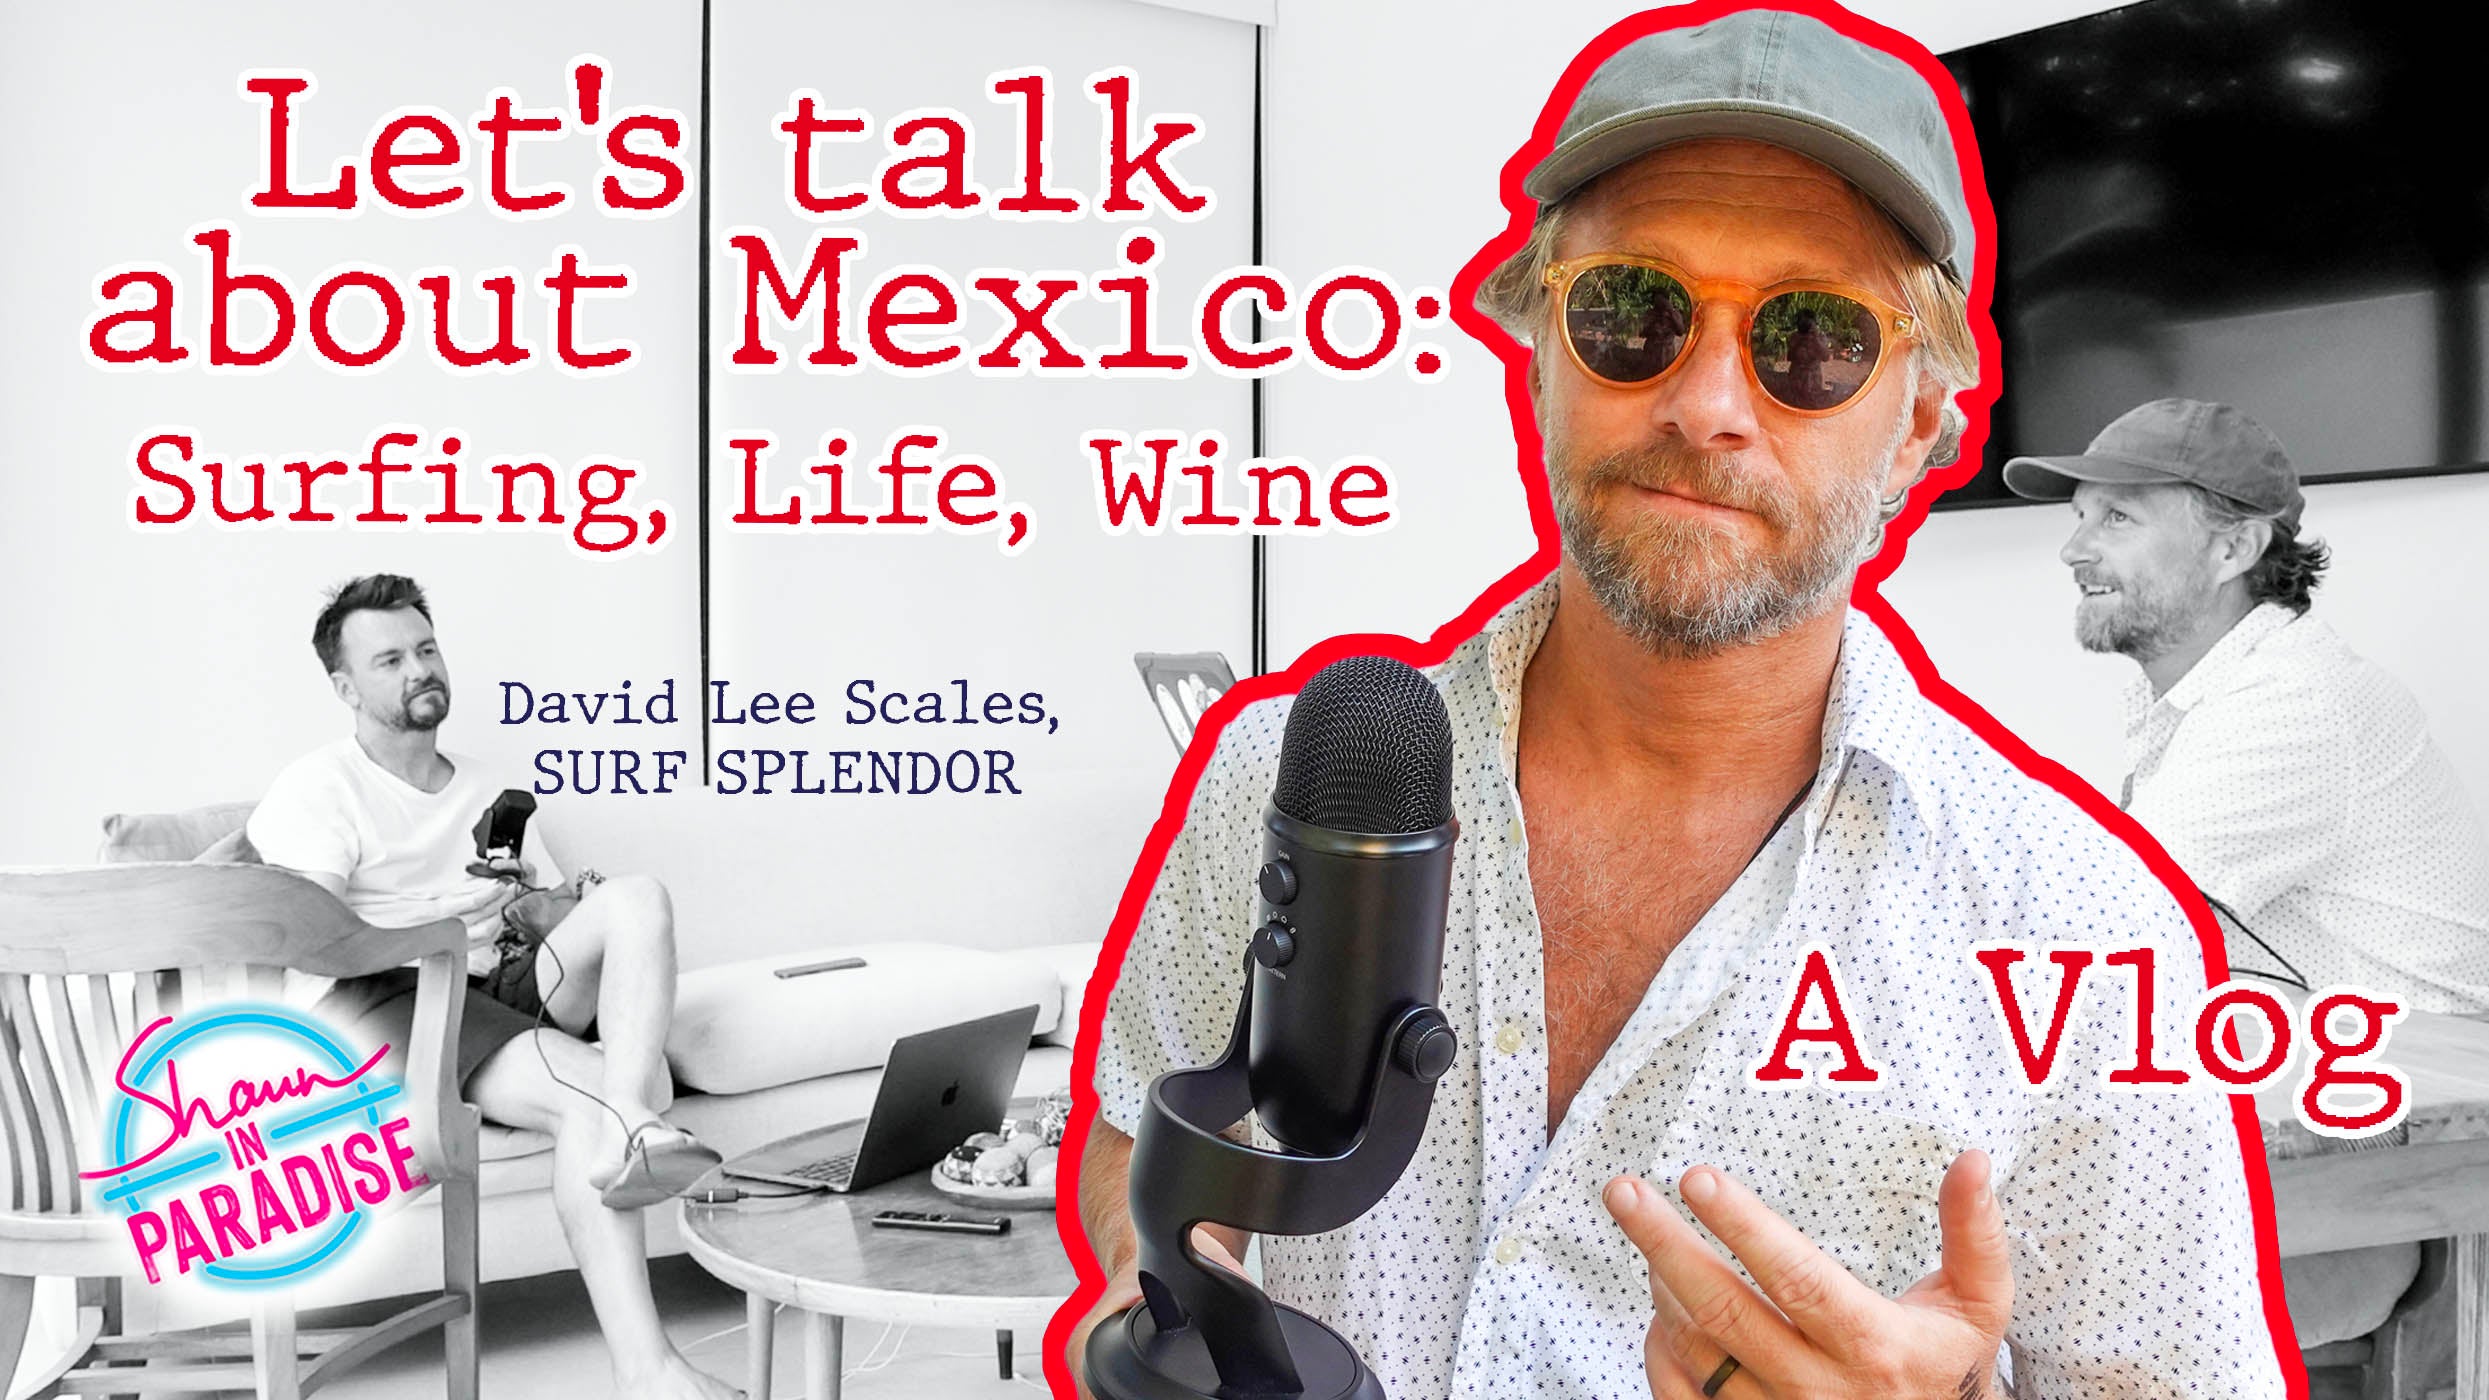 Load video: LET&#39;S TALK ABOUT MEXICO WITH DAVID LE SCALES FROM SURFSPLENDOR PODCAST